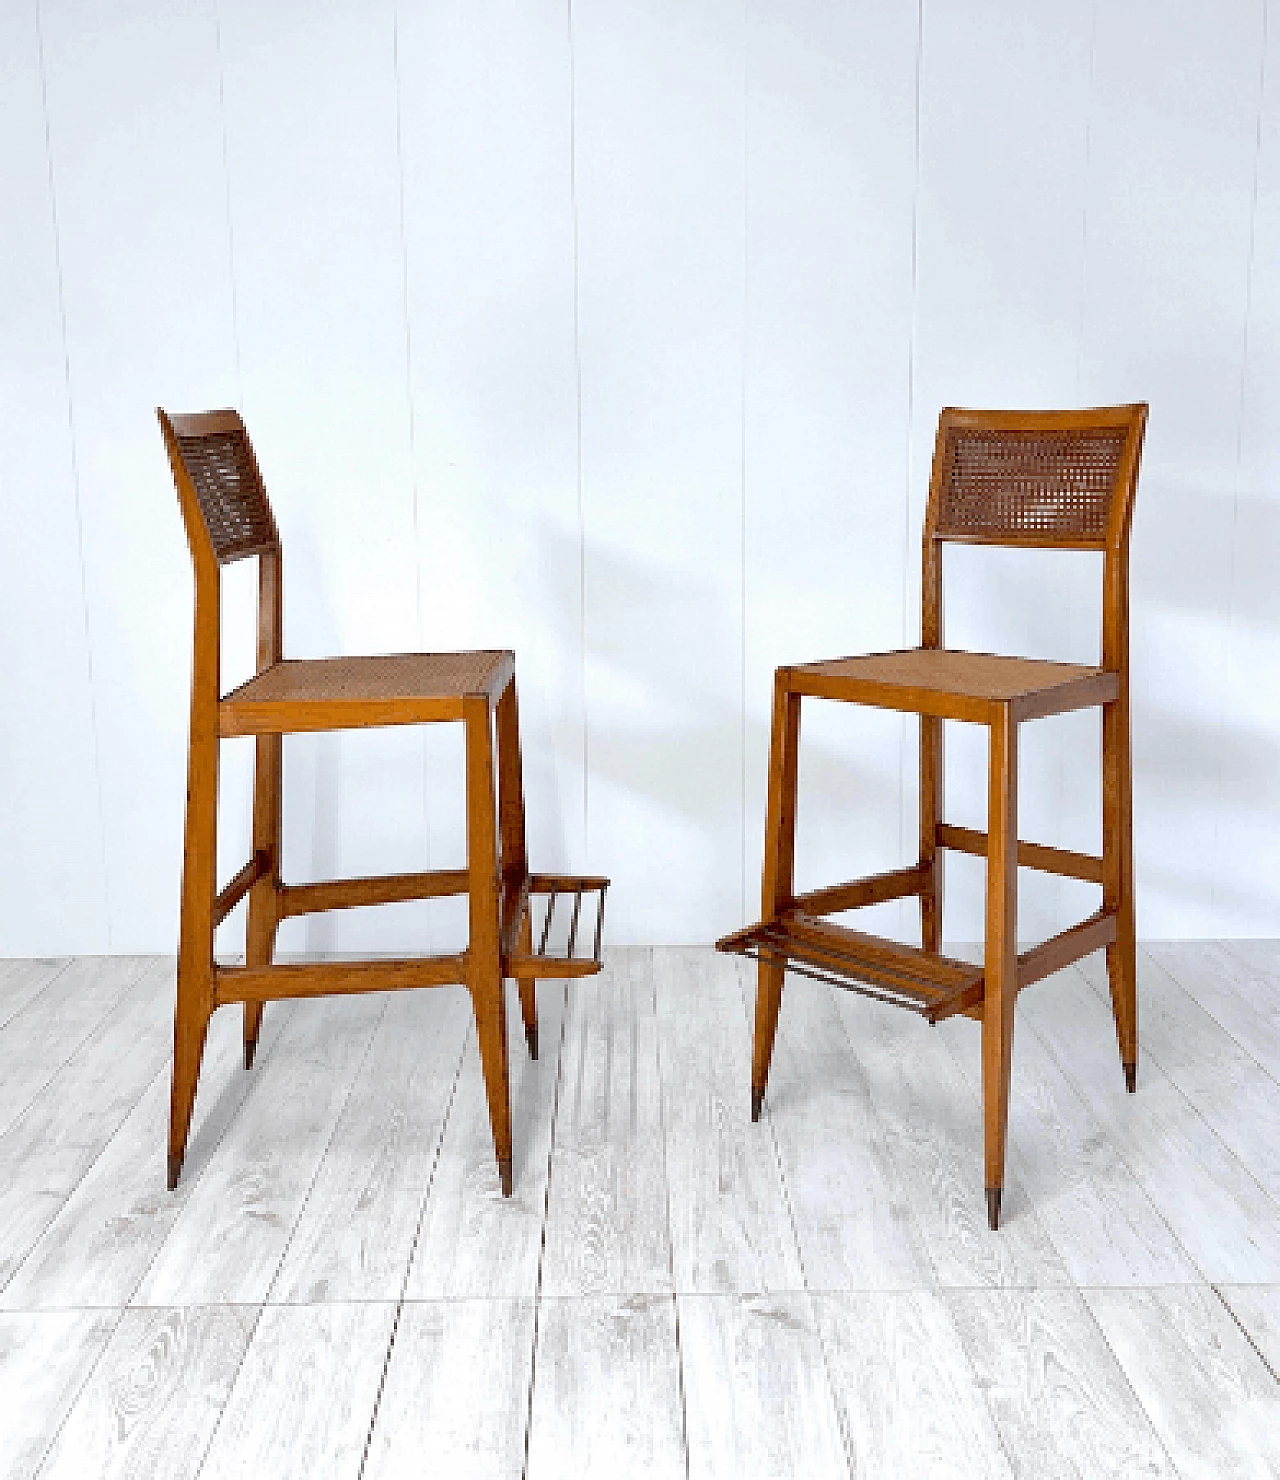 Pair of croupier stools by Gio Ponti for the Sanremo Casino, 1950s 5